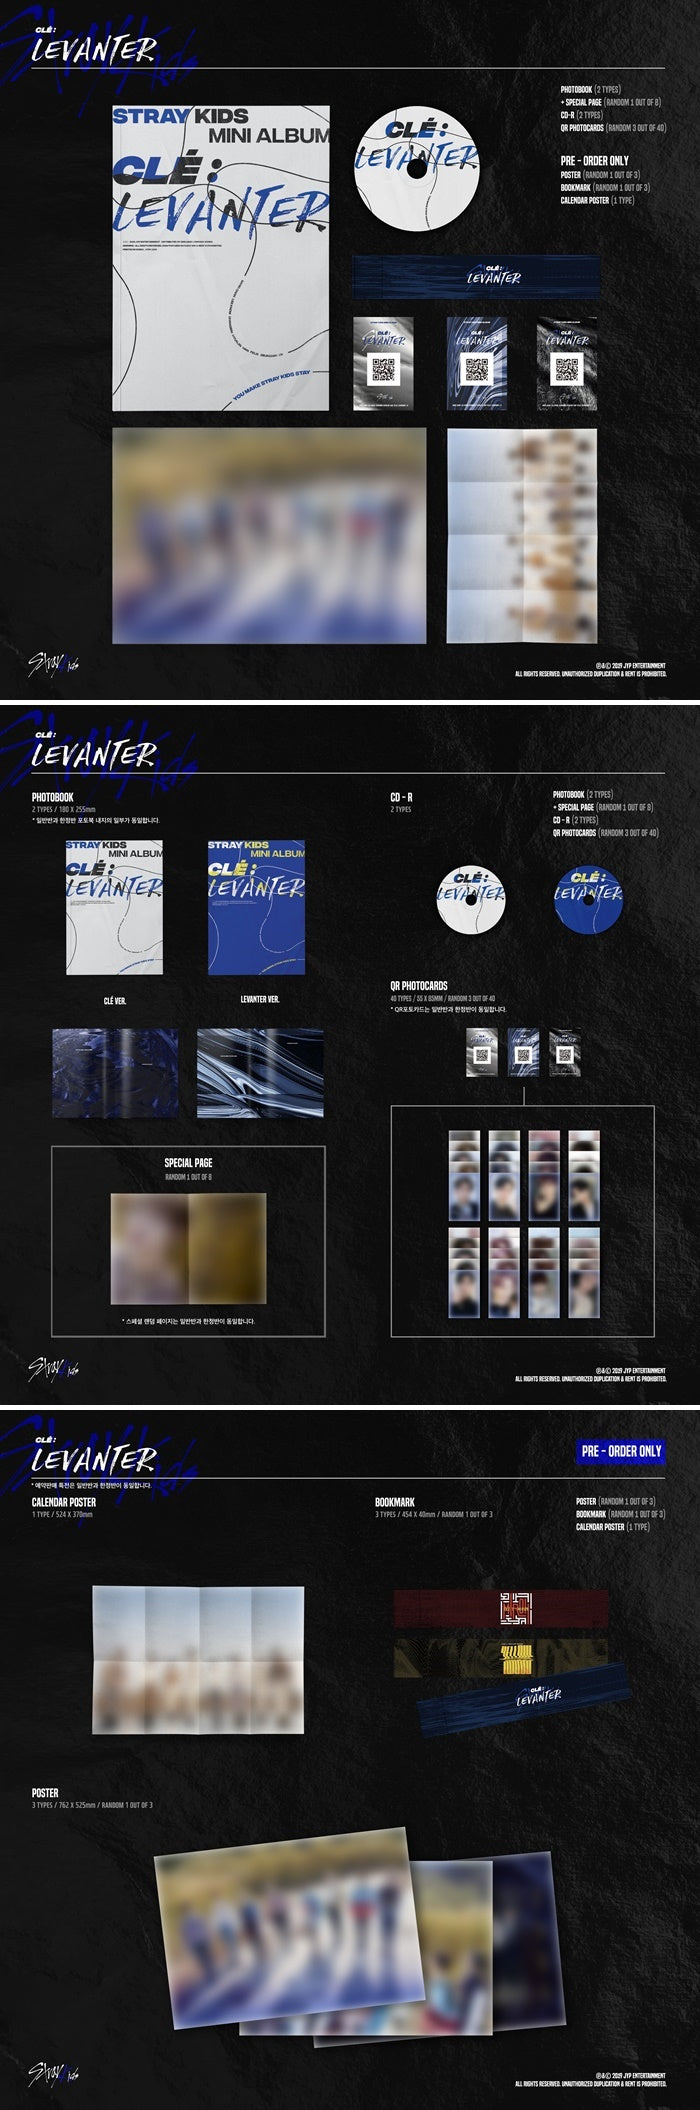 Stray Kids, released the final version of the 'Cle' series mini album 'Cle : LEVANTER' on December 9th! - Participate in w...